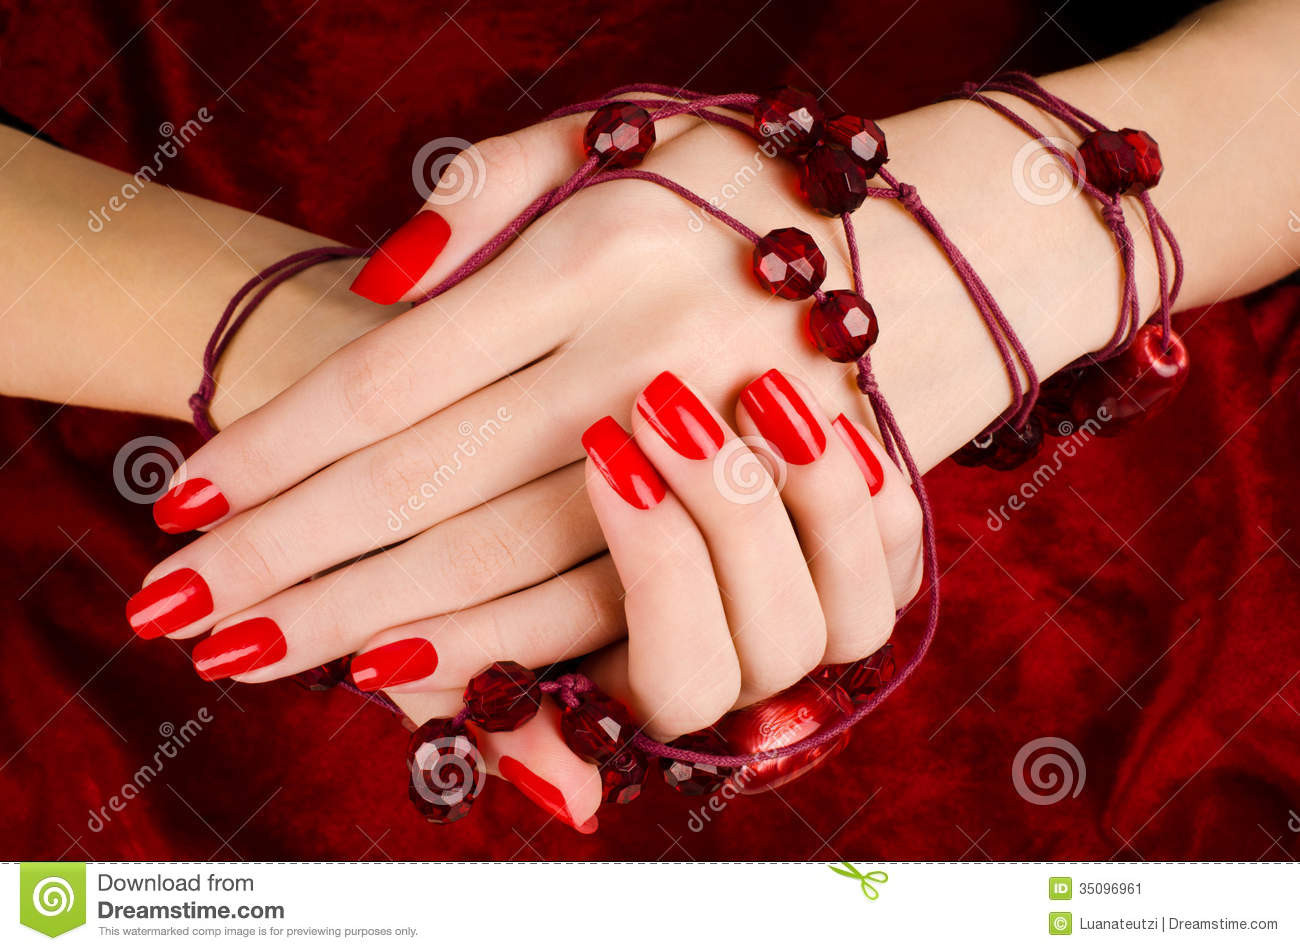 close-up-beautiful-female-hands-sexy-red-manicure-woman-velvet-background-35096961.jpg